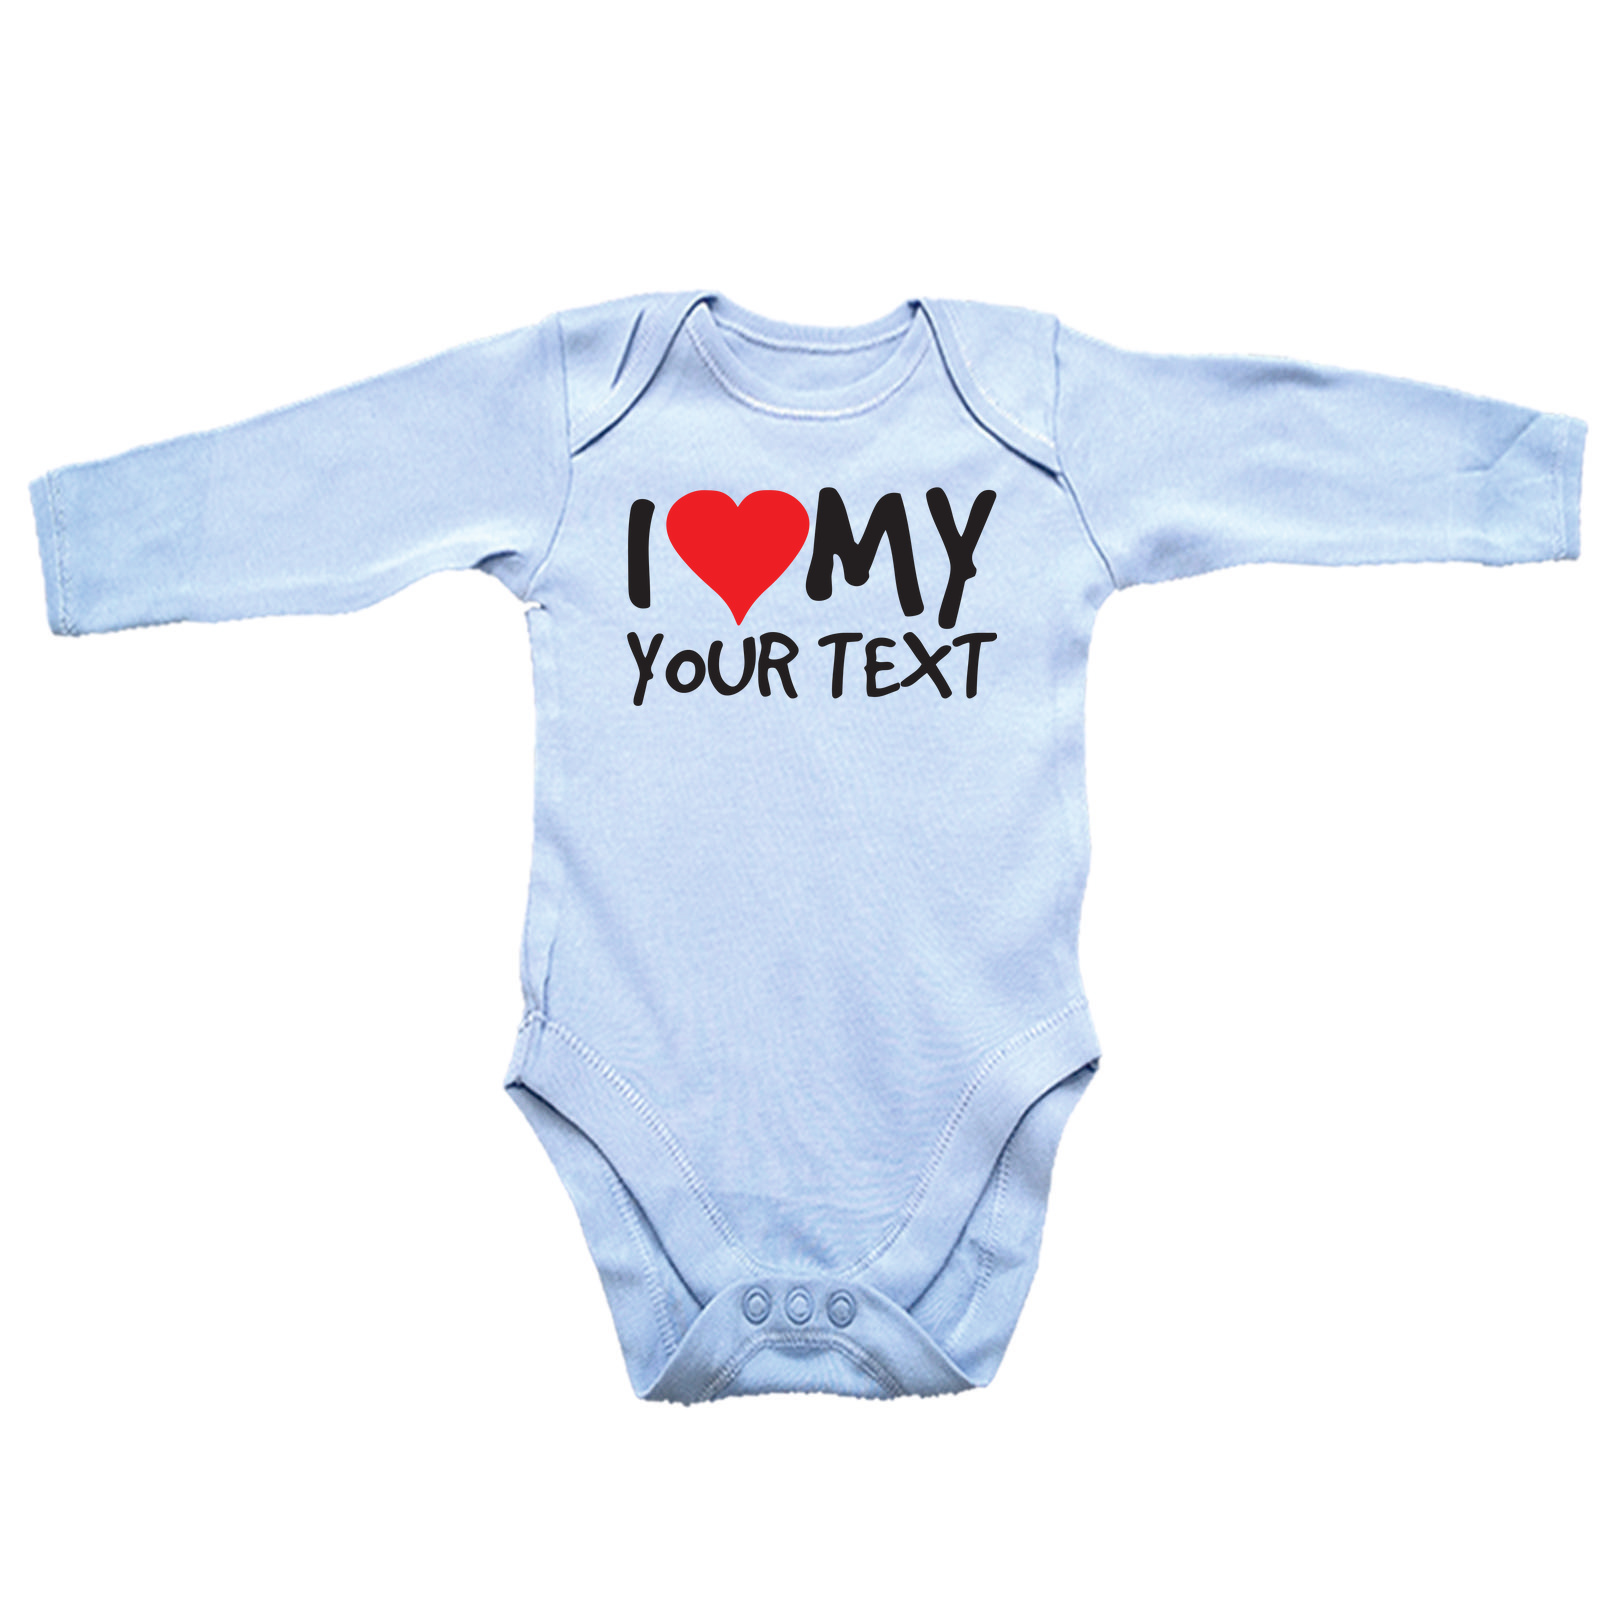 Funny Baby Infants Babygrow Romper Jumpsuit I Heart Love My Your Text 